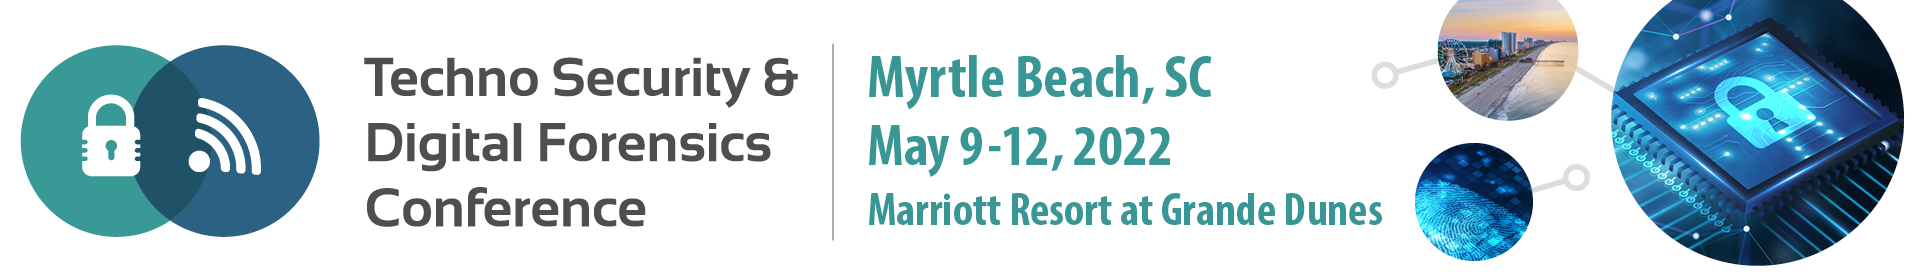 2022 Myrtle Beach Techno Security & Digital Forensics Conference Event Banner